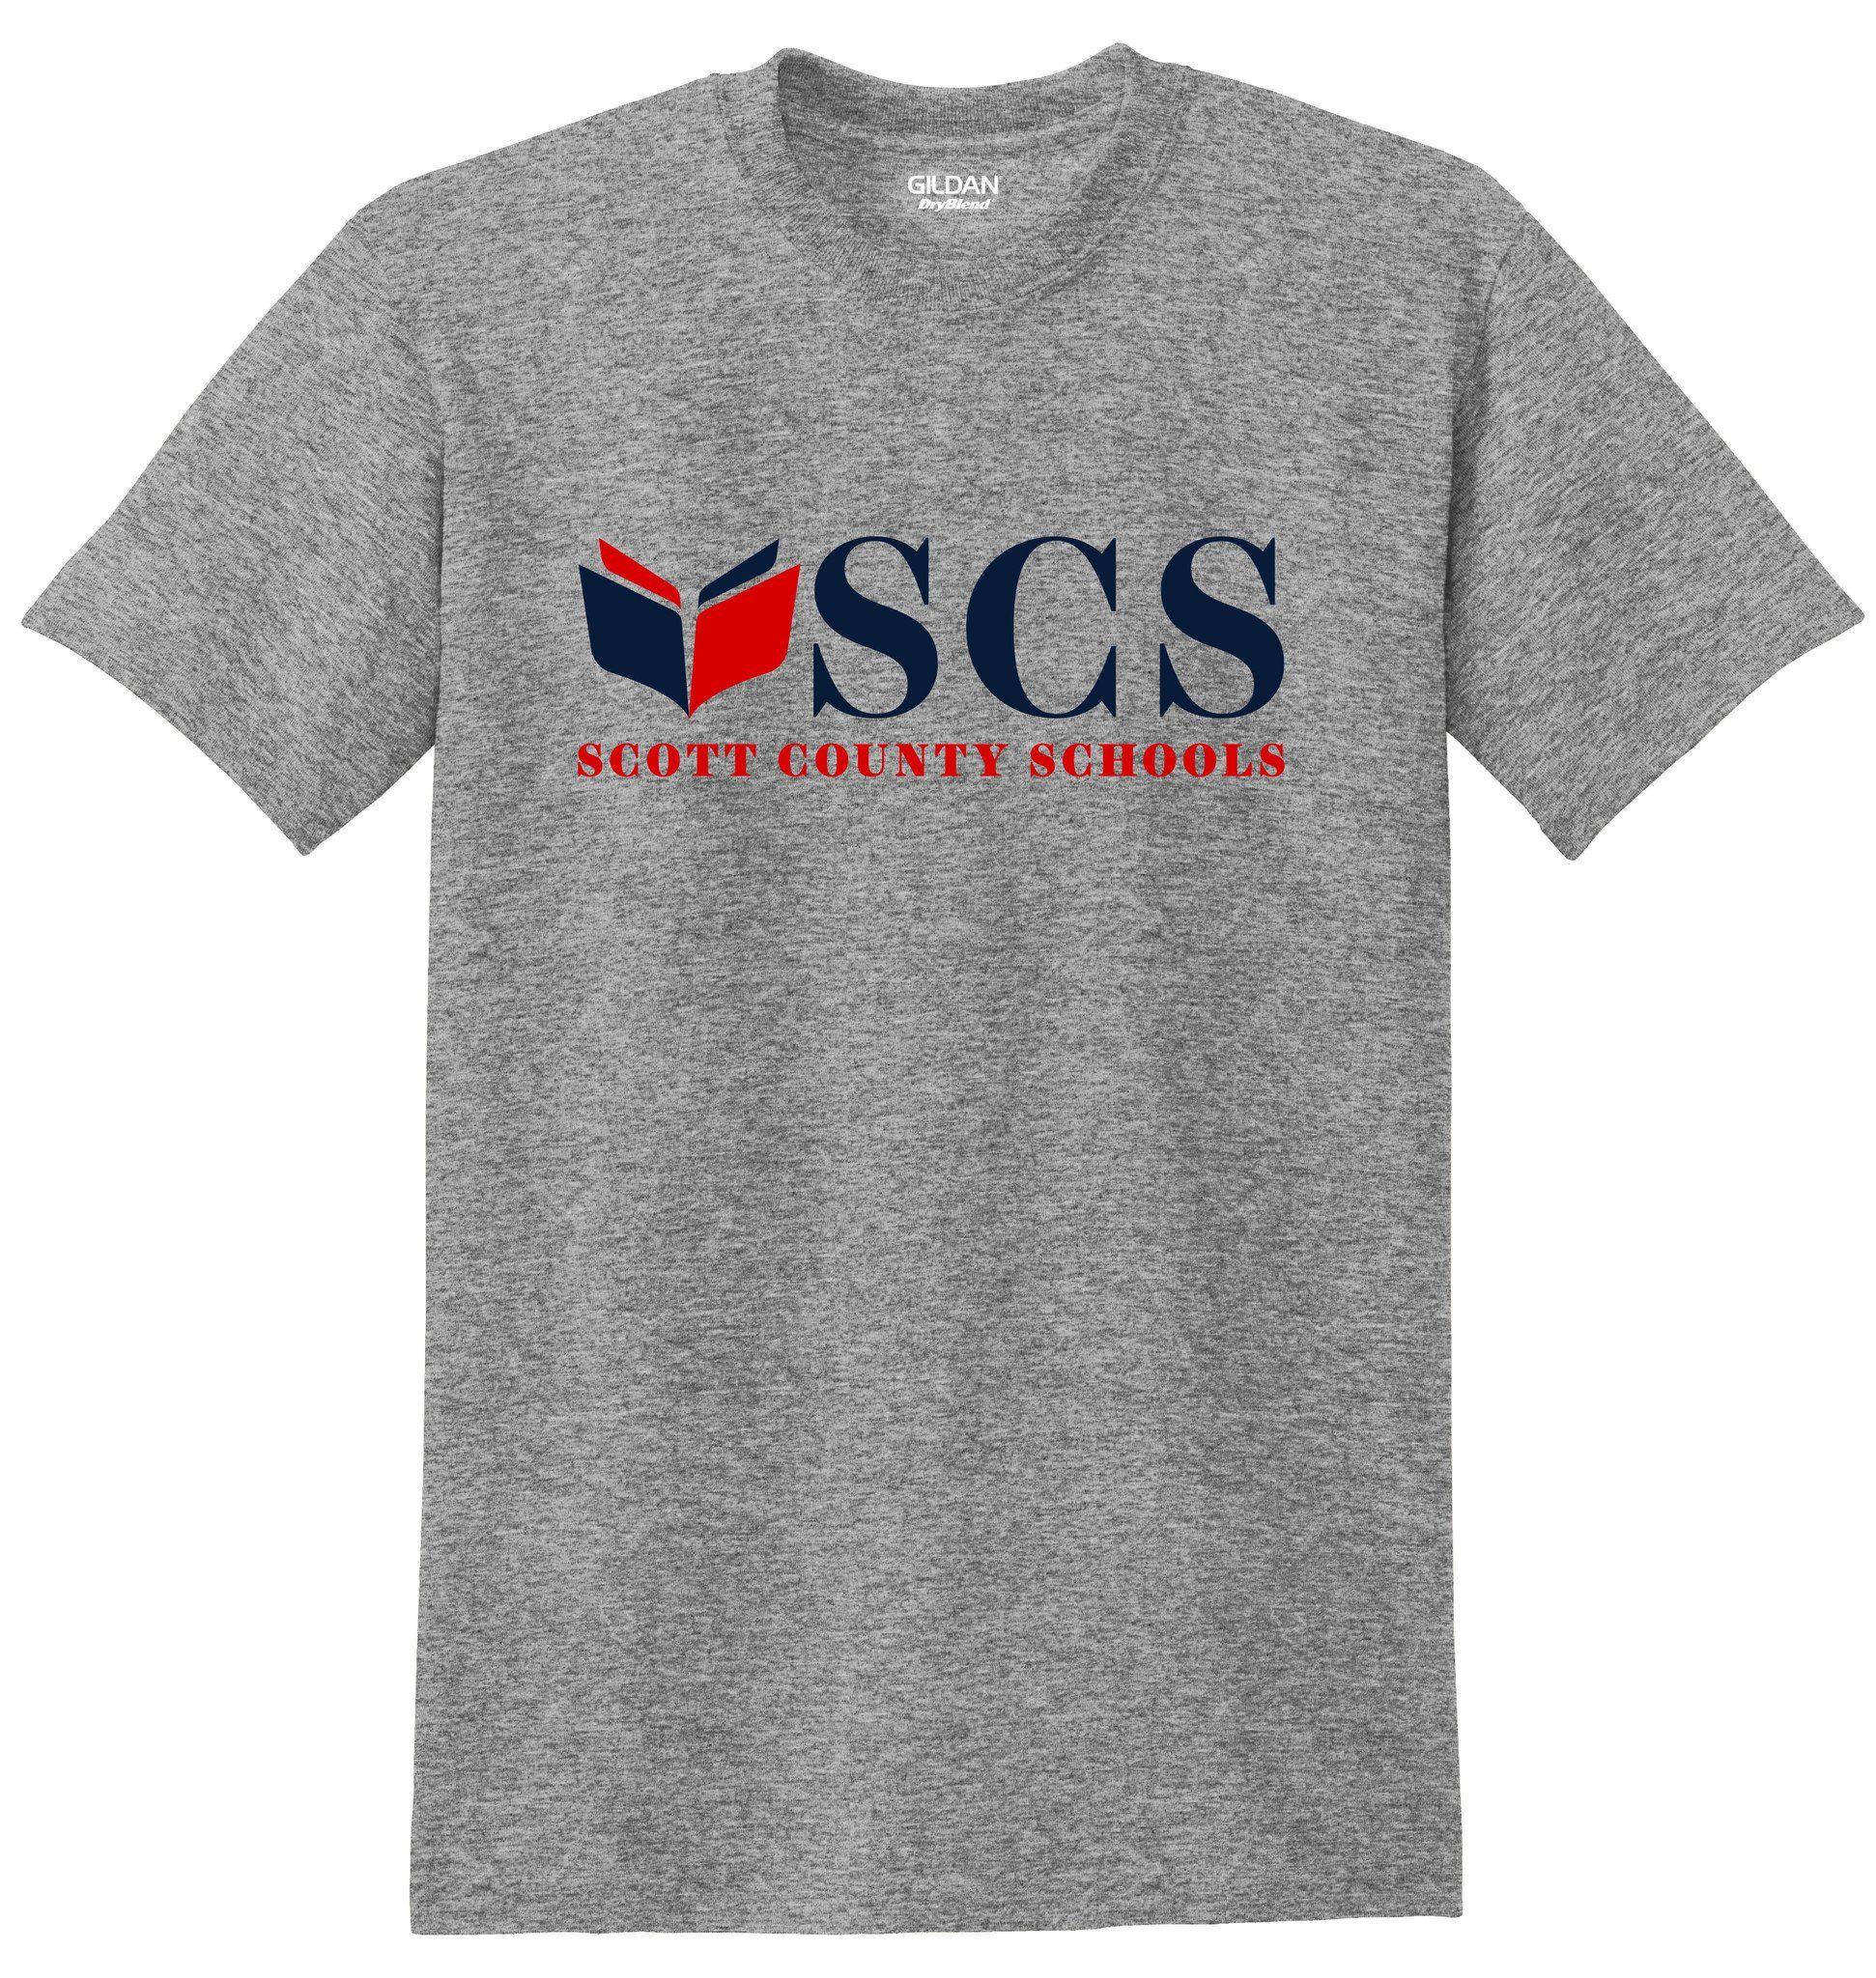 What Schools Have a Red T Logo - SCS Short Sleeve Tee With Navy/Red Logo - Asst. Colors - Surge ...